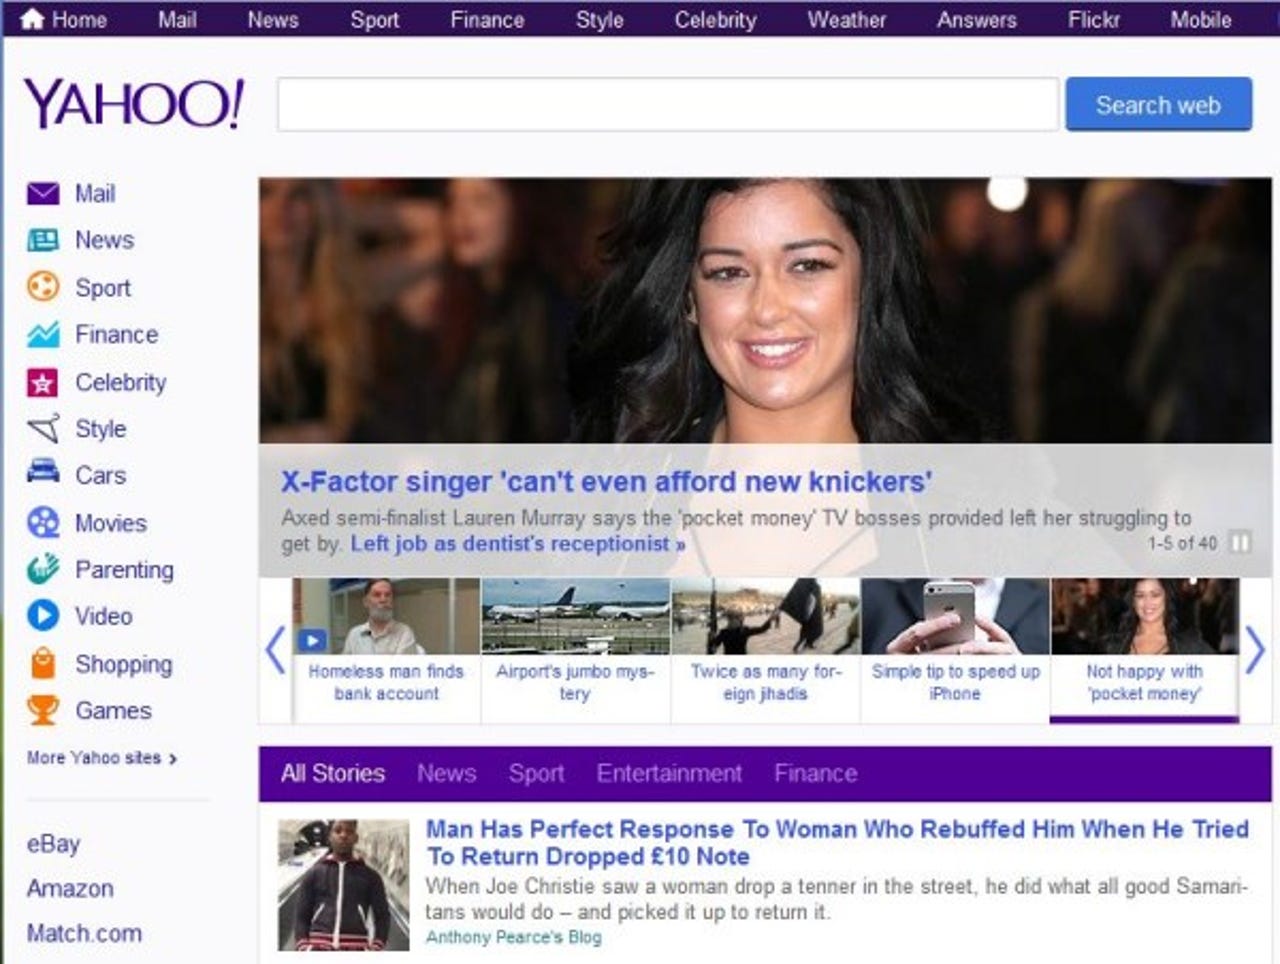 Yahoo's front page